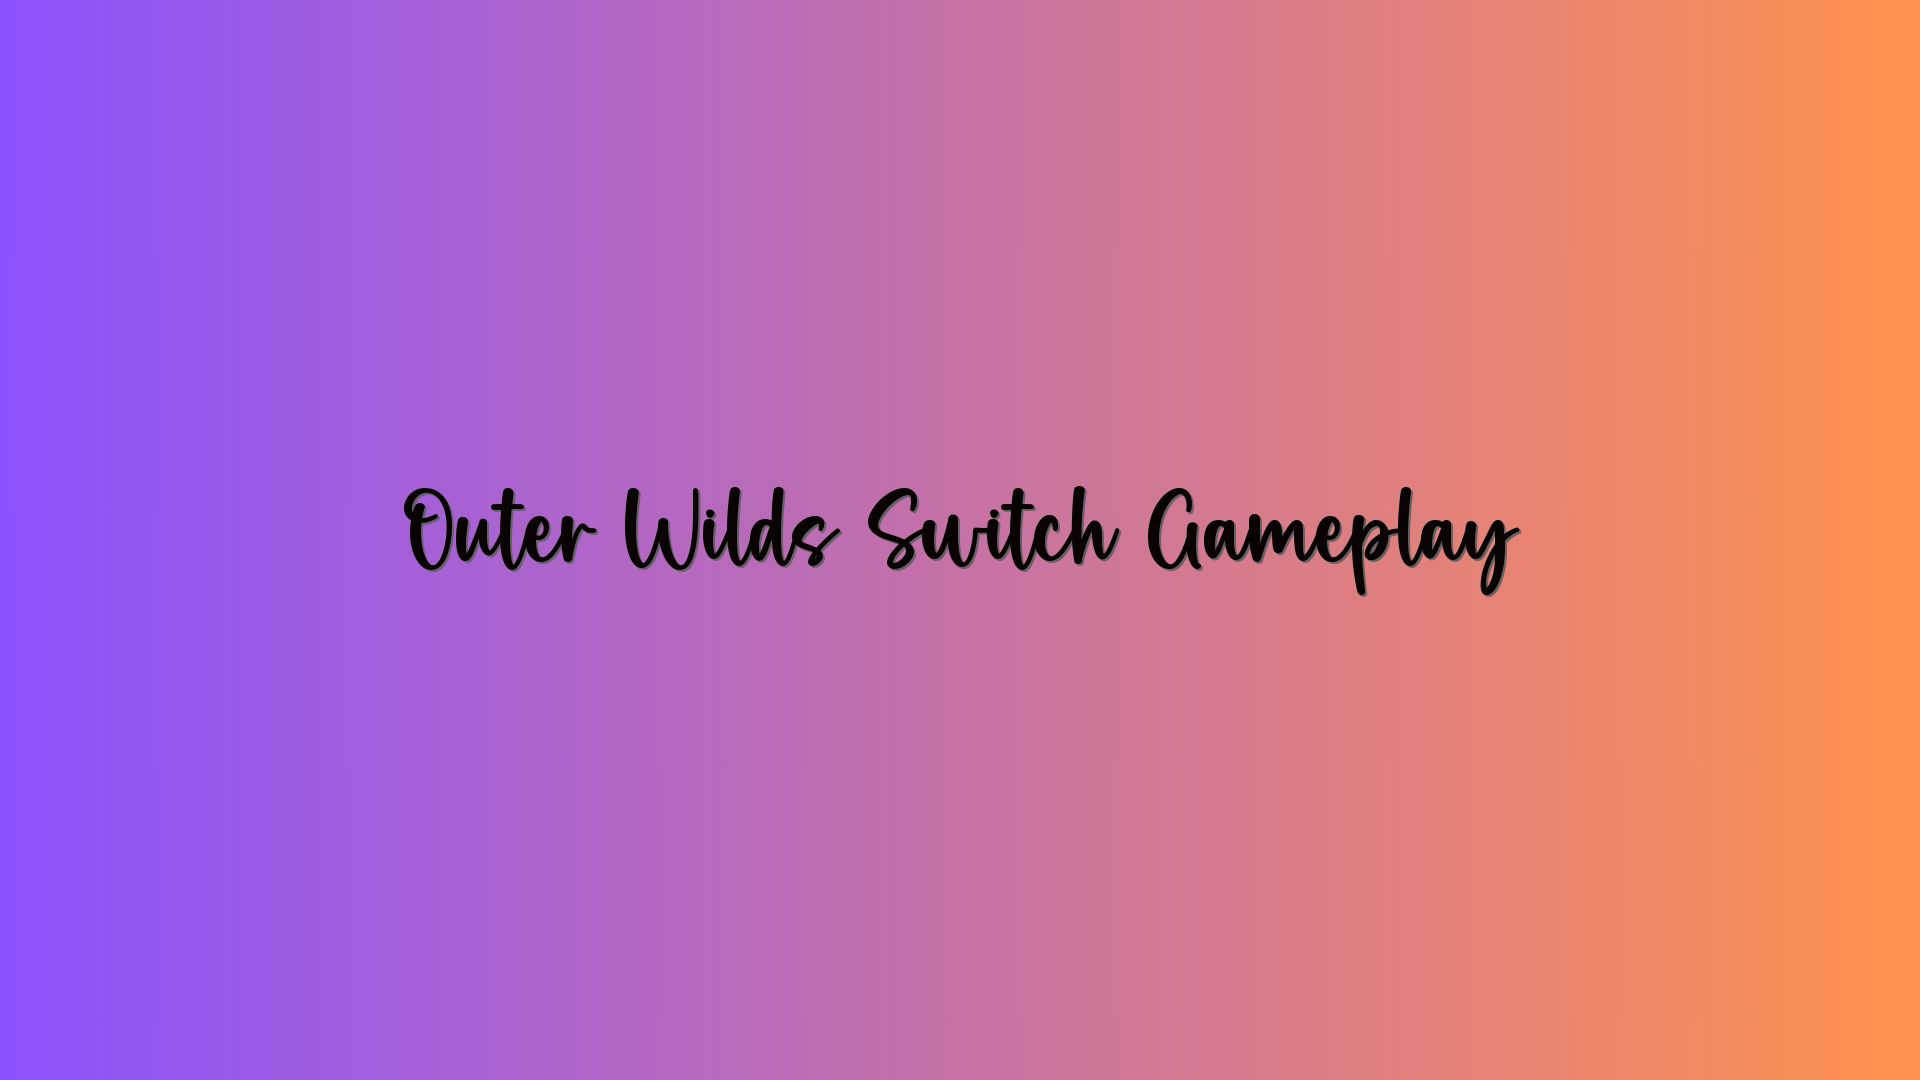 Outer Wilds Switch Gameplay